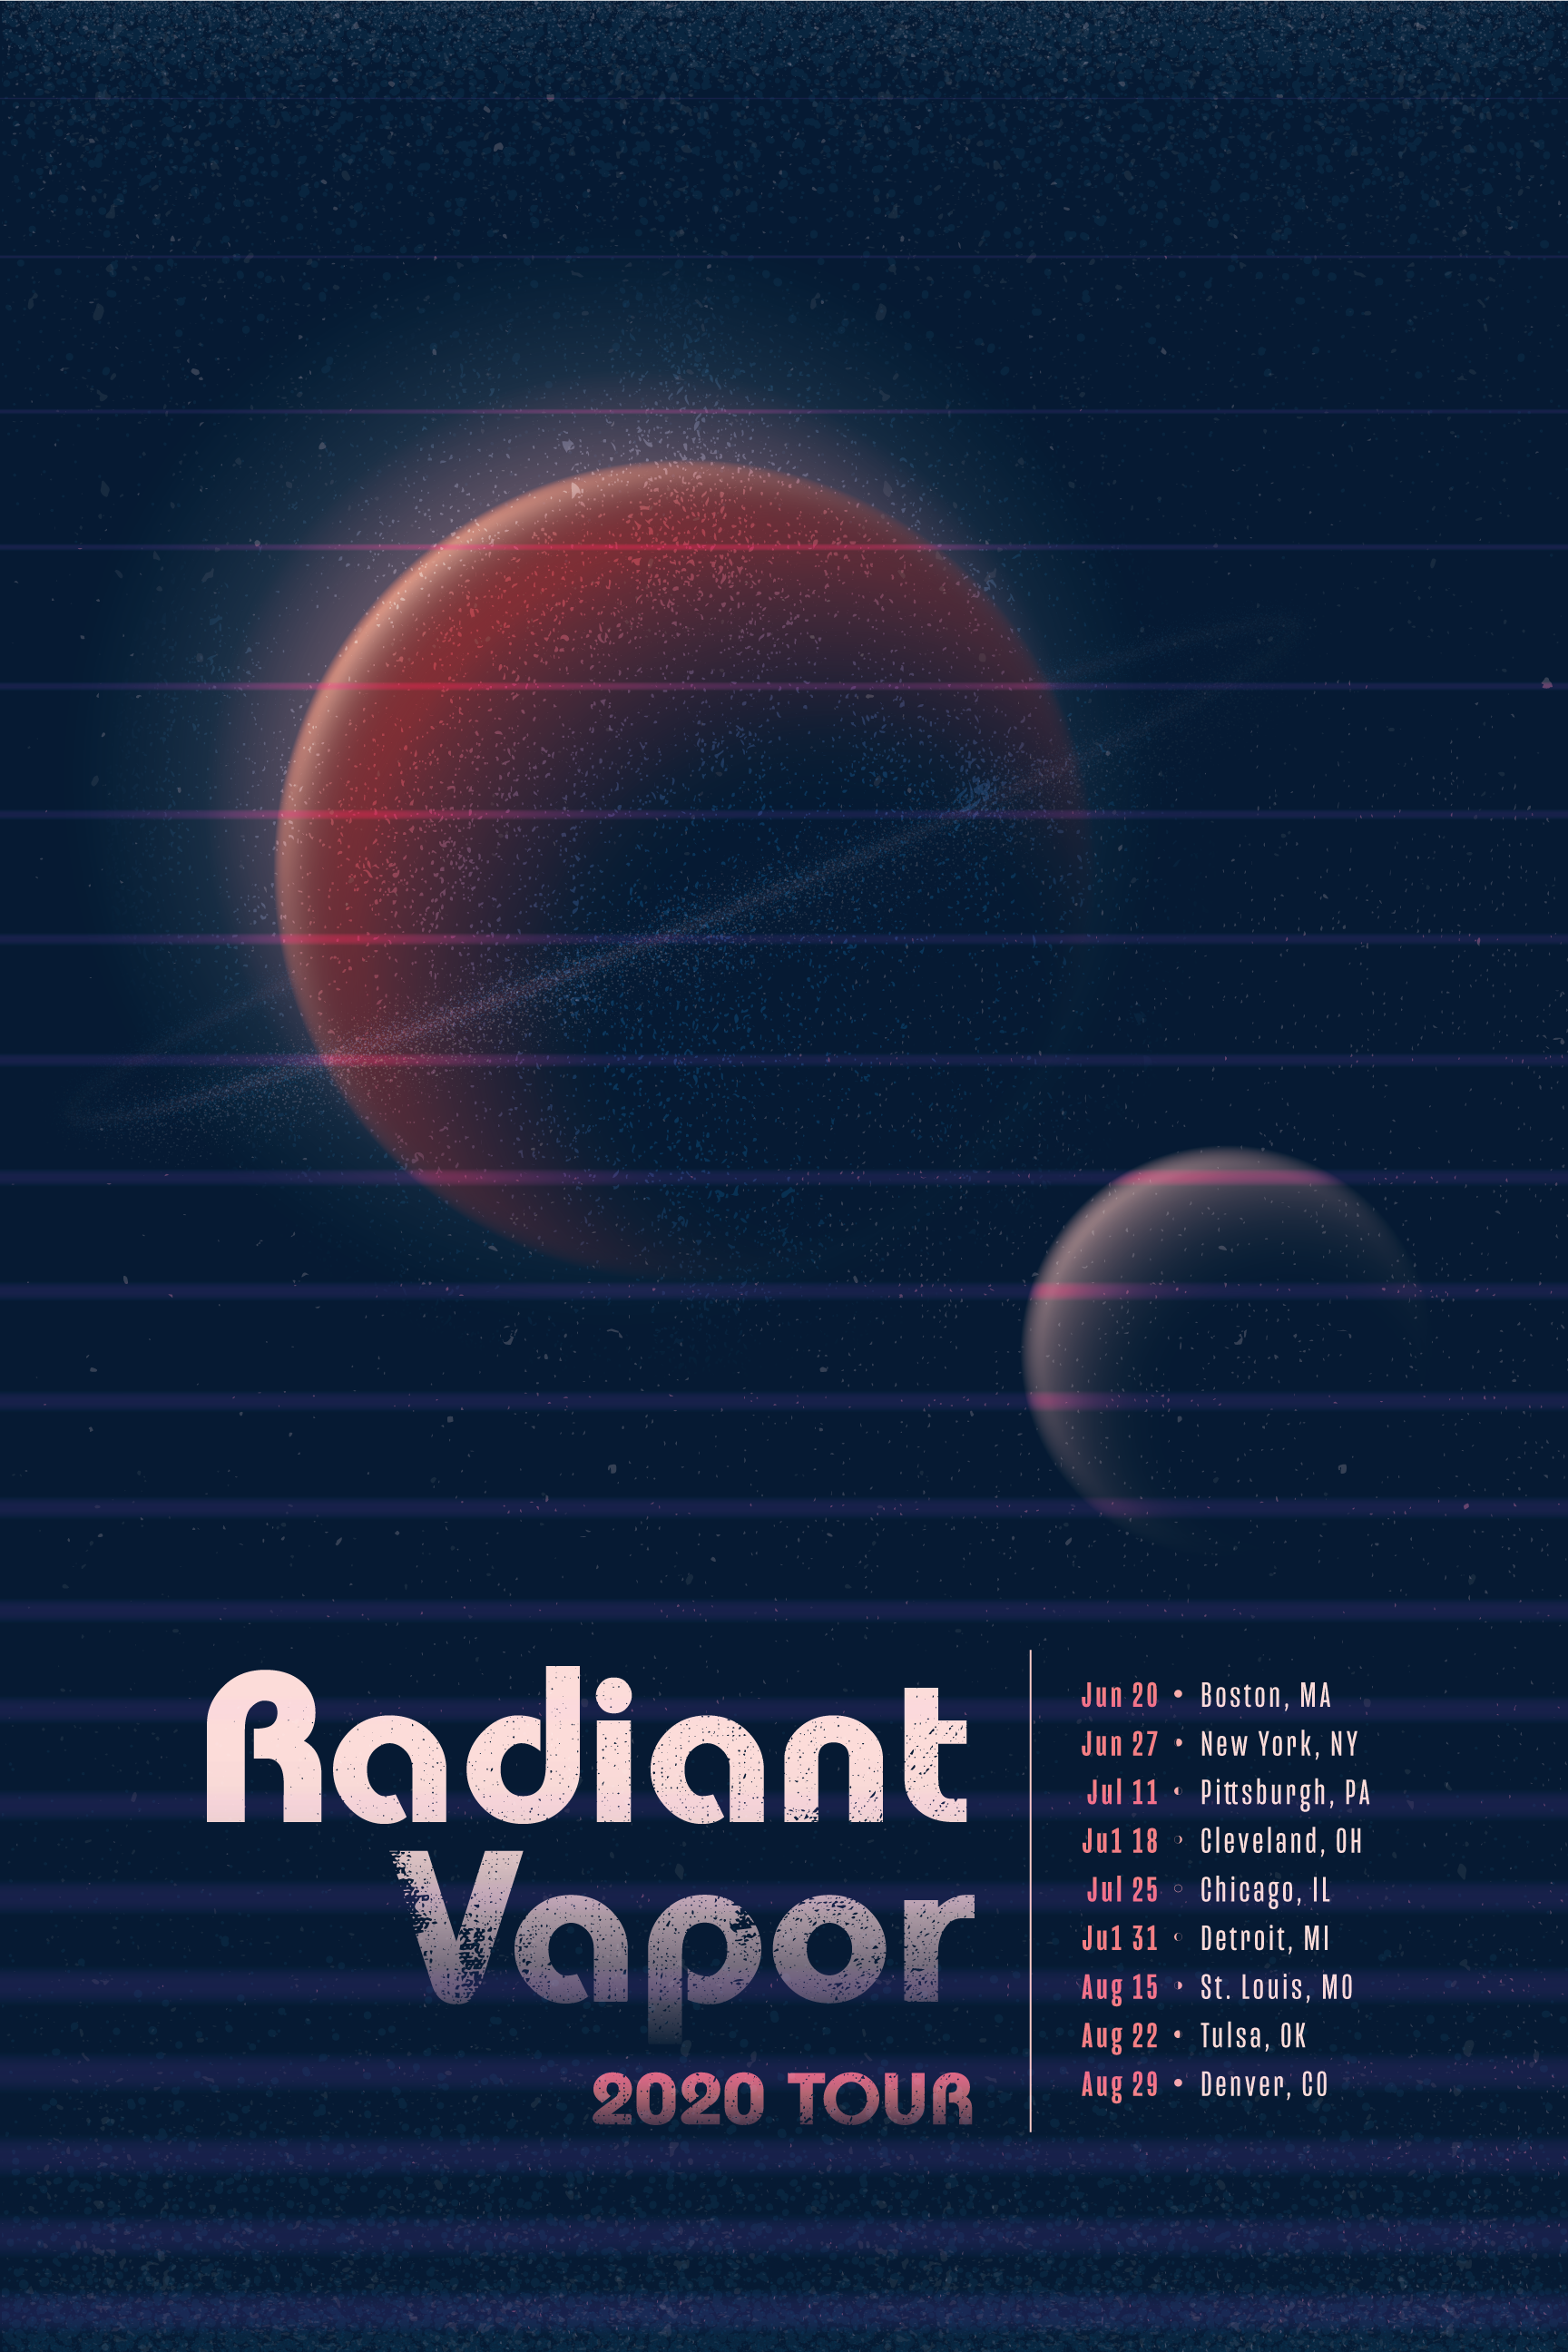 Poster 1: Radiant Vapor 2020 Tour. Heavily textured and out-of-focus planets in space with horizontal screen artifacts.